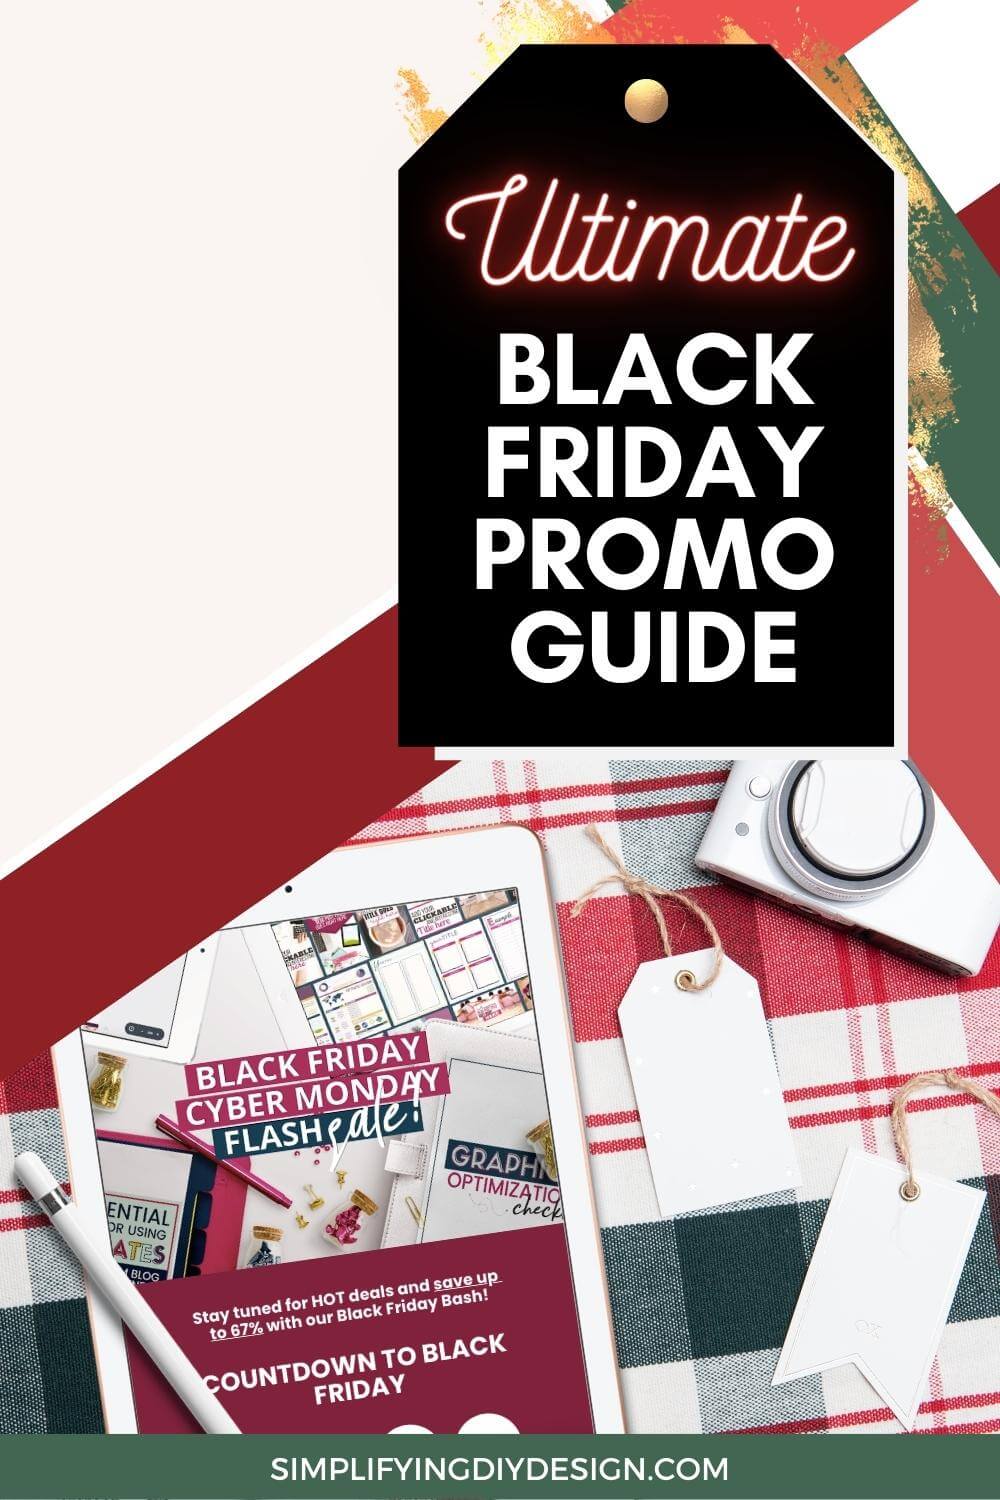 Bloggers need to have a Black Friday marketing strategy. Plan your Black Friday promotion NOW to boost your blog's income with product and affiliate sales!